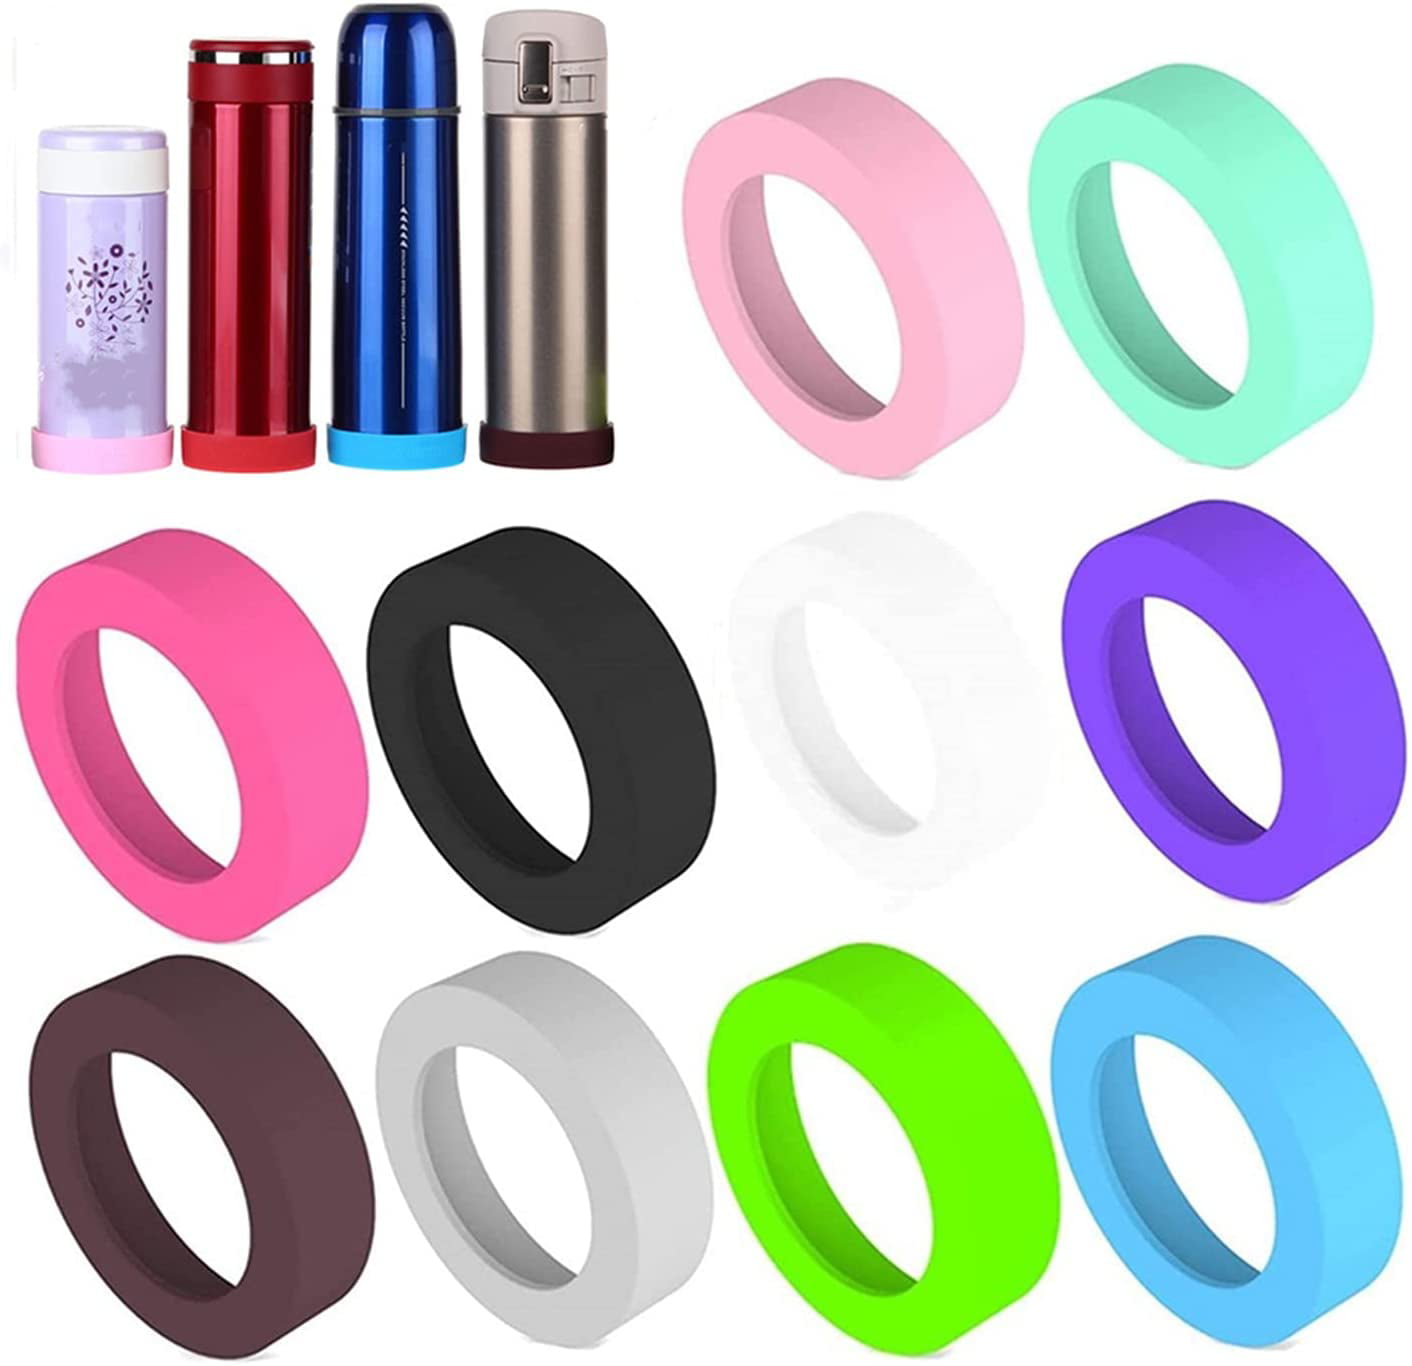 New Silicone Cup Bottom Protective Cover Coasters Mat Heat Insulation Anti-Slip